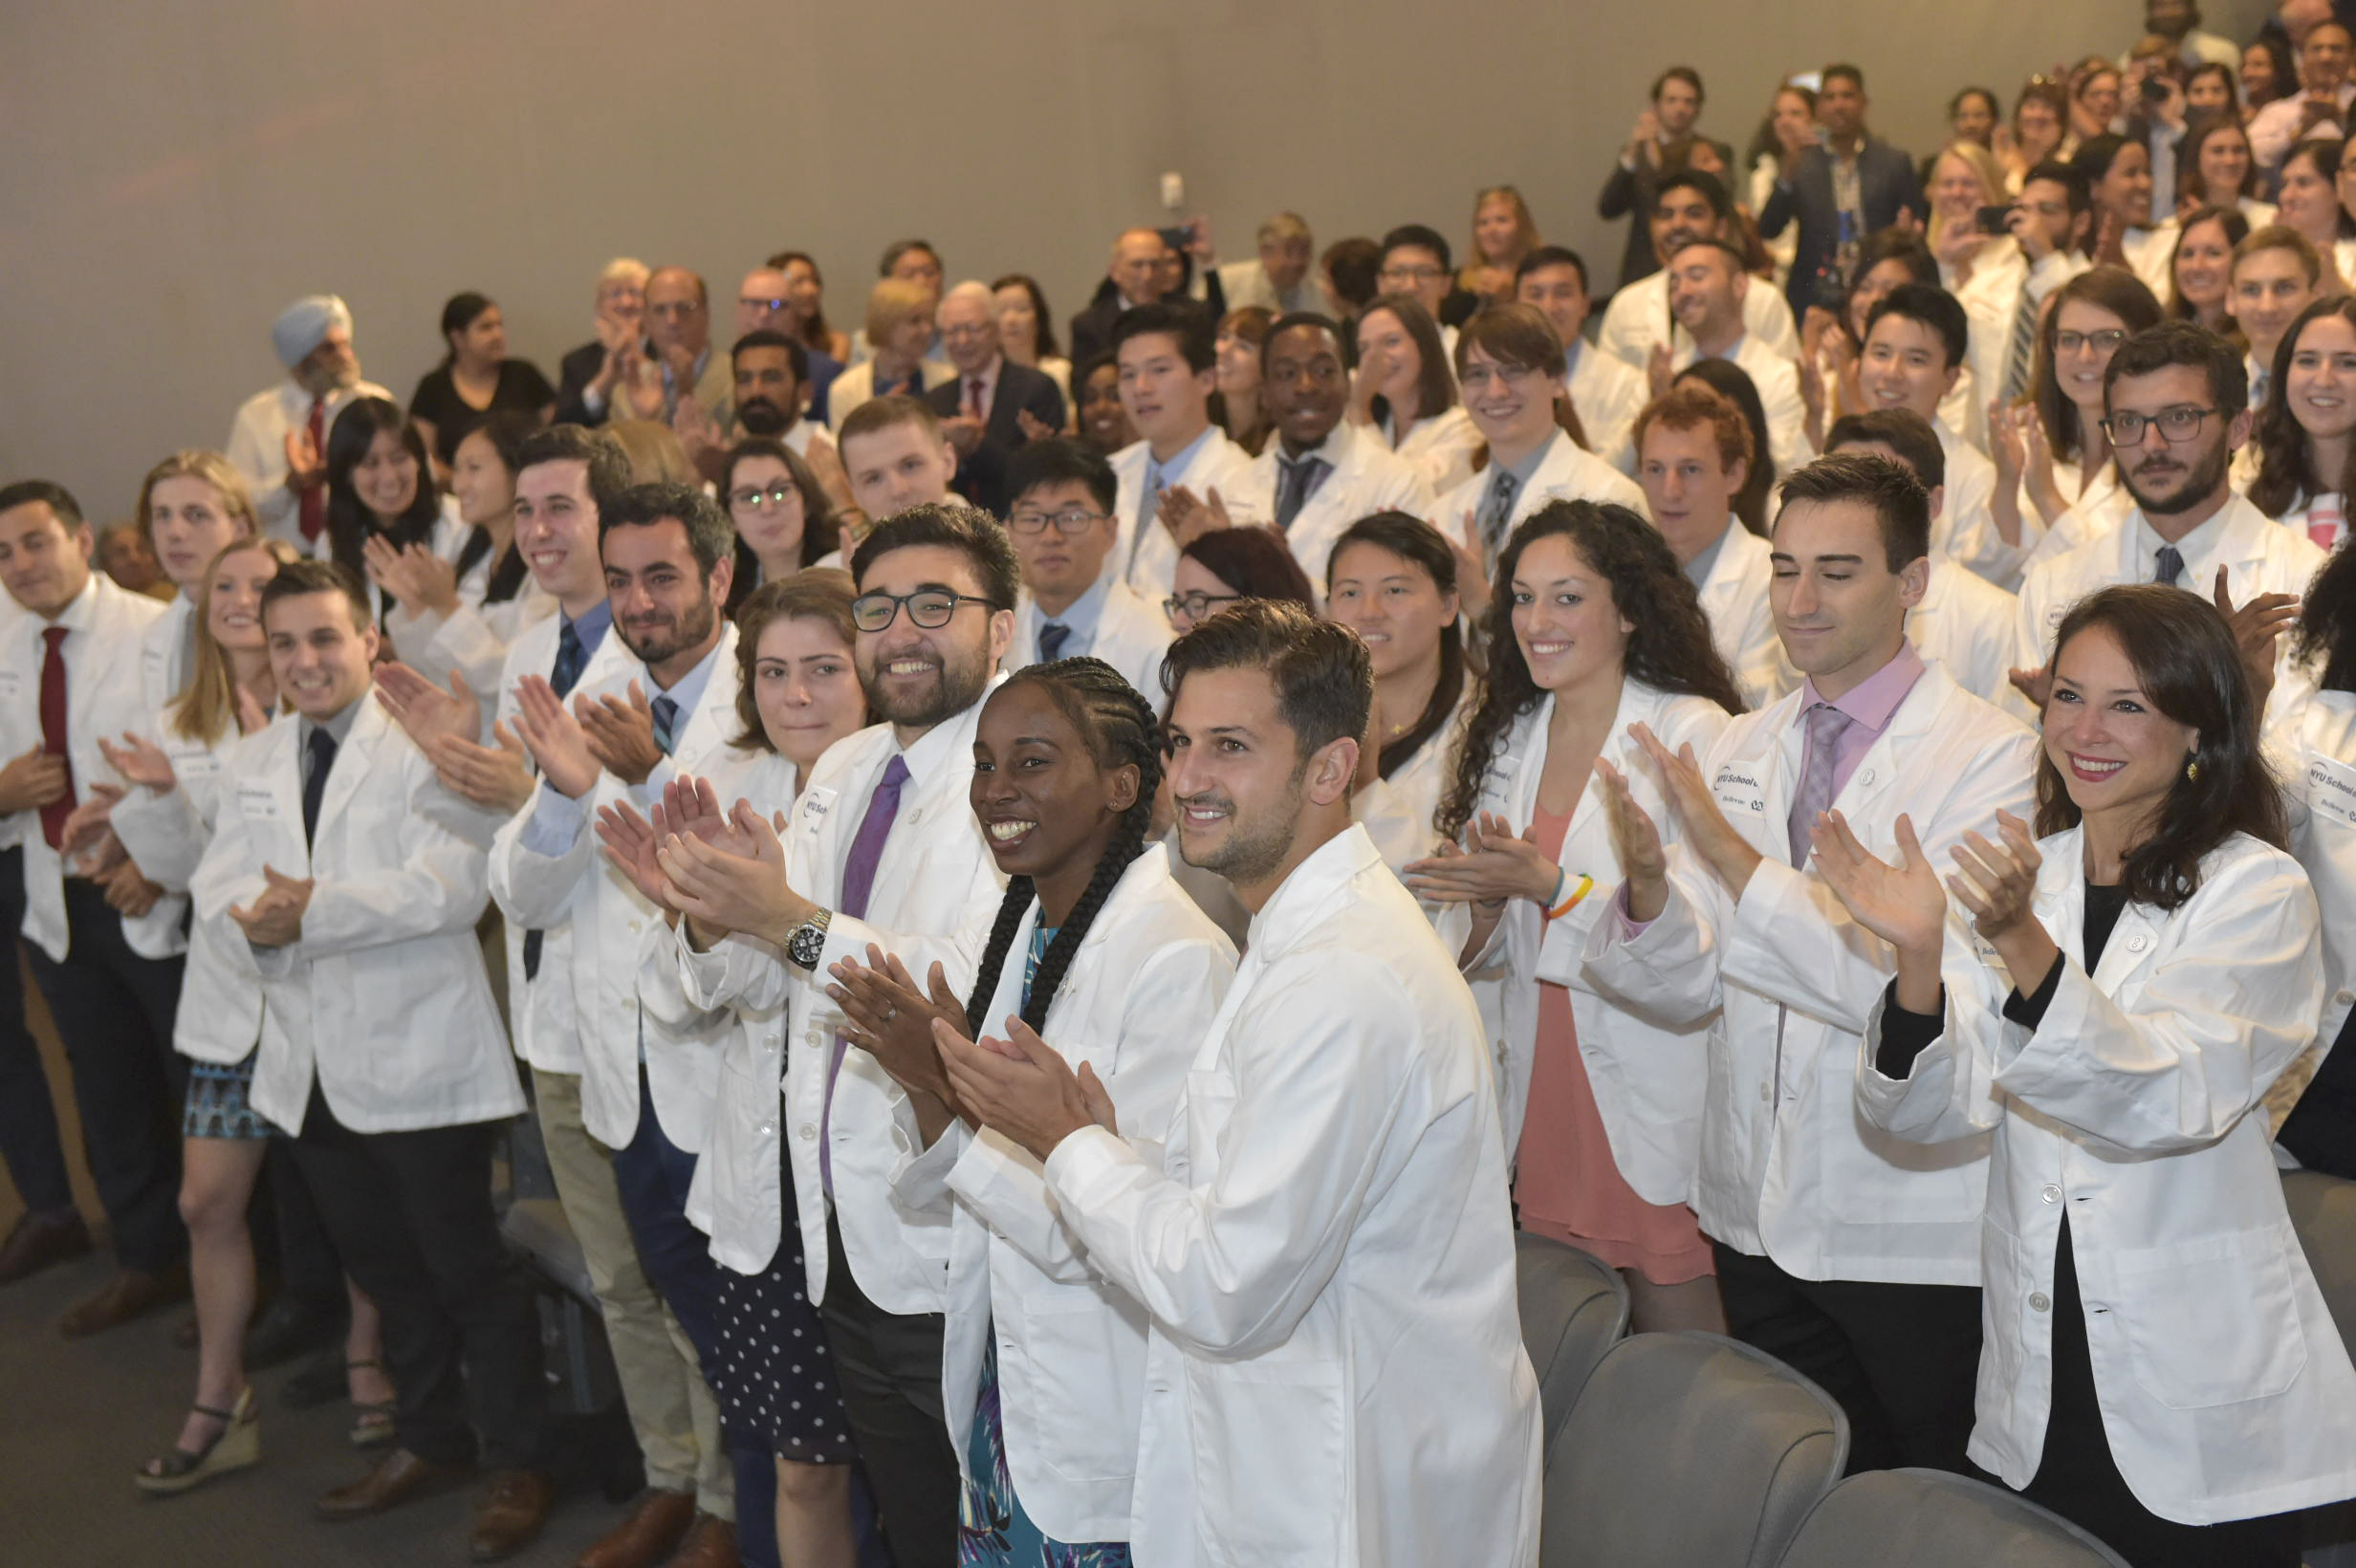 PHOTO: New York University's School of Medicine announces it is offering full-tuition scholarships to all current and future students in its MD degree program, regardless of need or merit, Aug. 16, 2018.